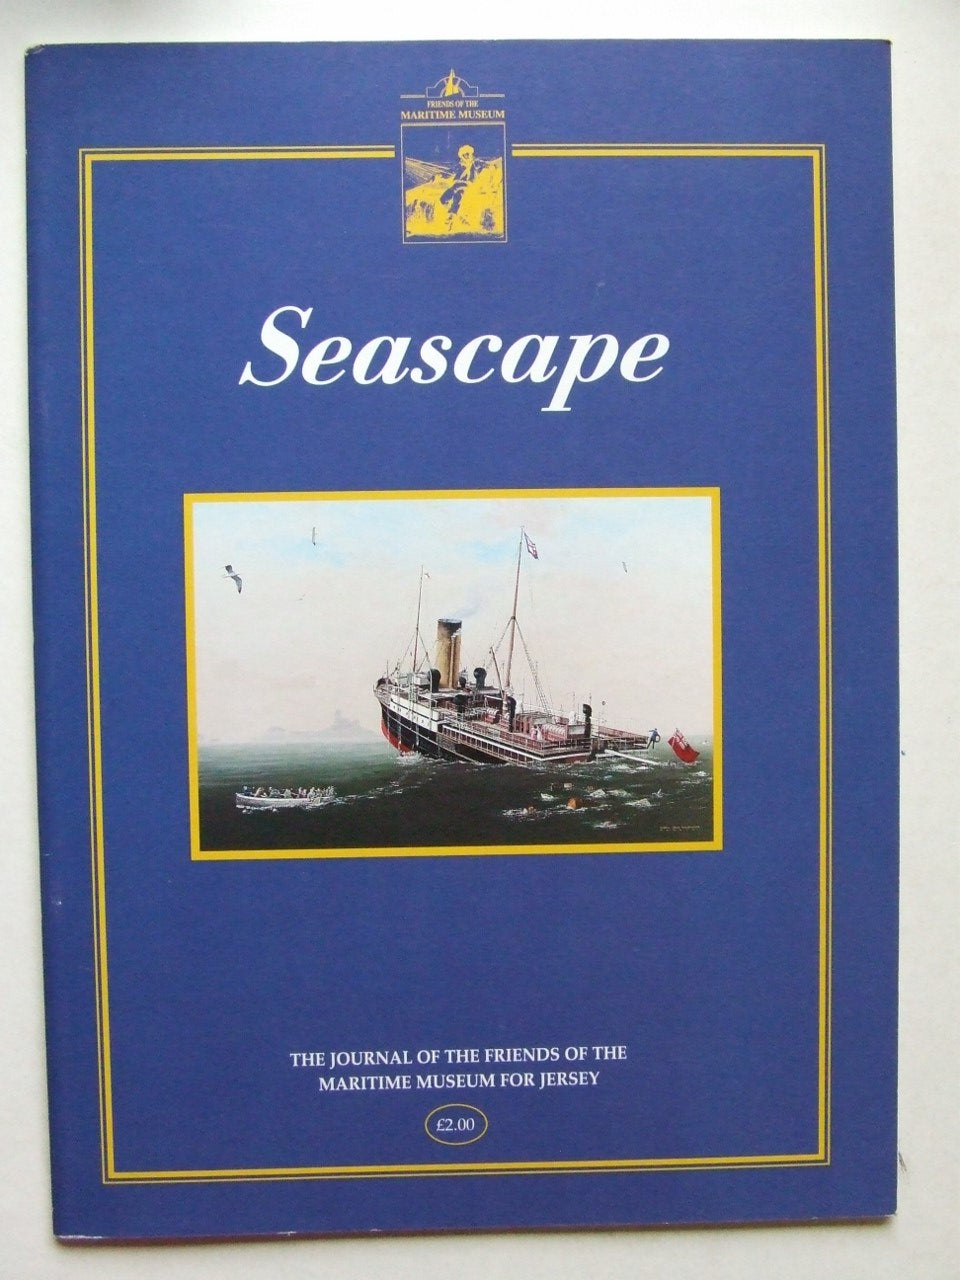 Seascape, the journal of the Friends of the Maritime Museum for Jersey